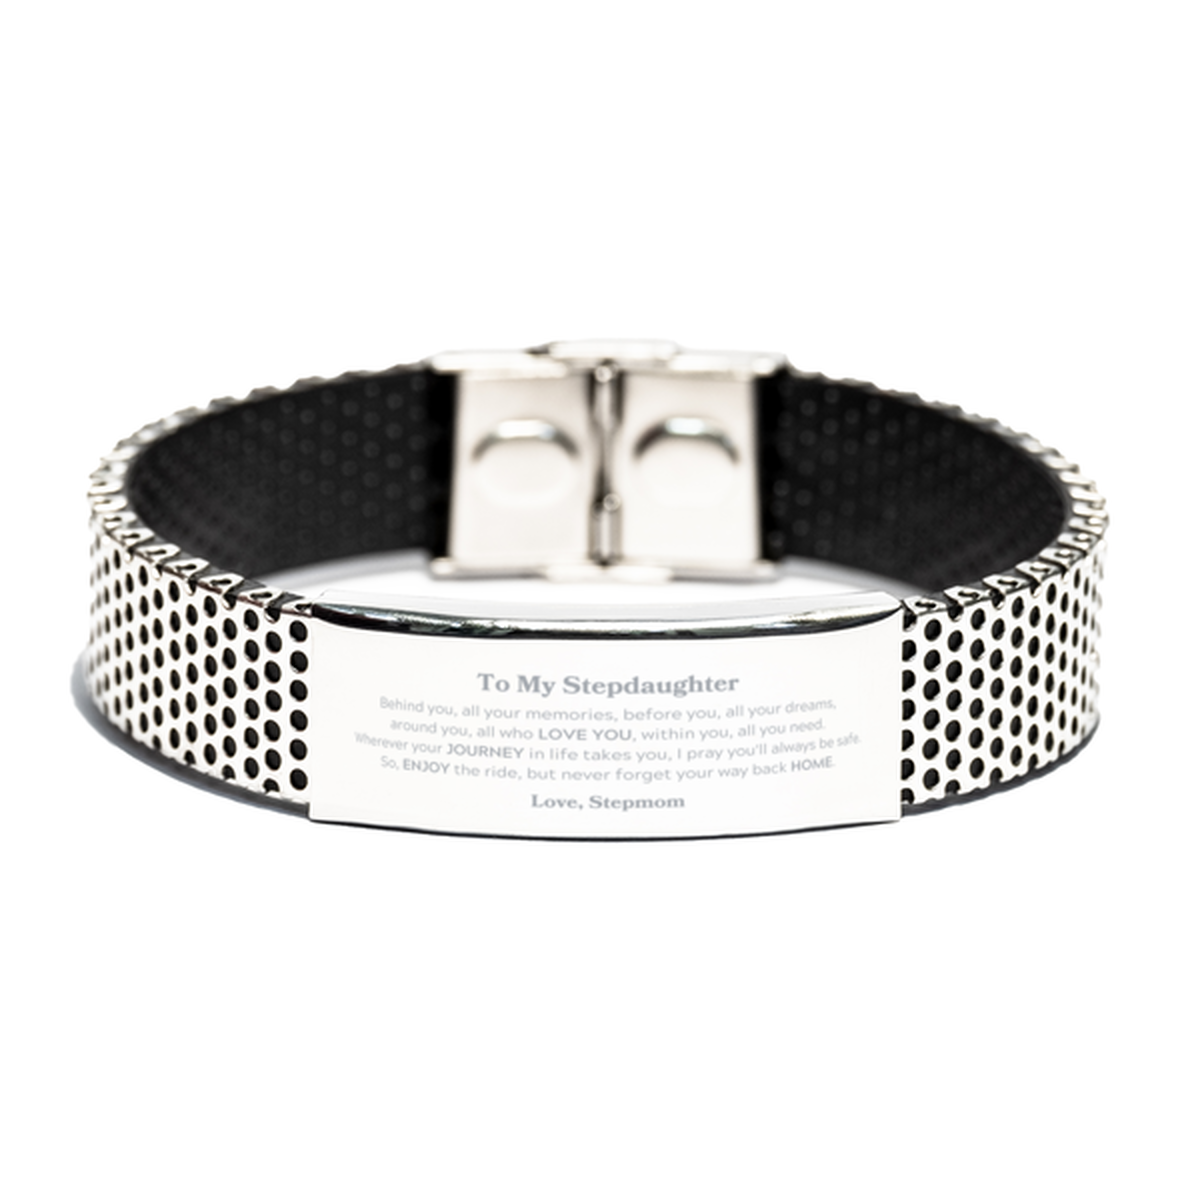 To My Stepdaughter Graduation Gifts from Stepmom, Stepdaughter Stainless Steel Bracelet Christmas Birthday Gifts for Stepdaughter Behind you, all your memories, before you, all your dreams. Love, Stepmom